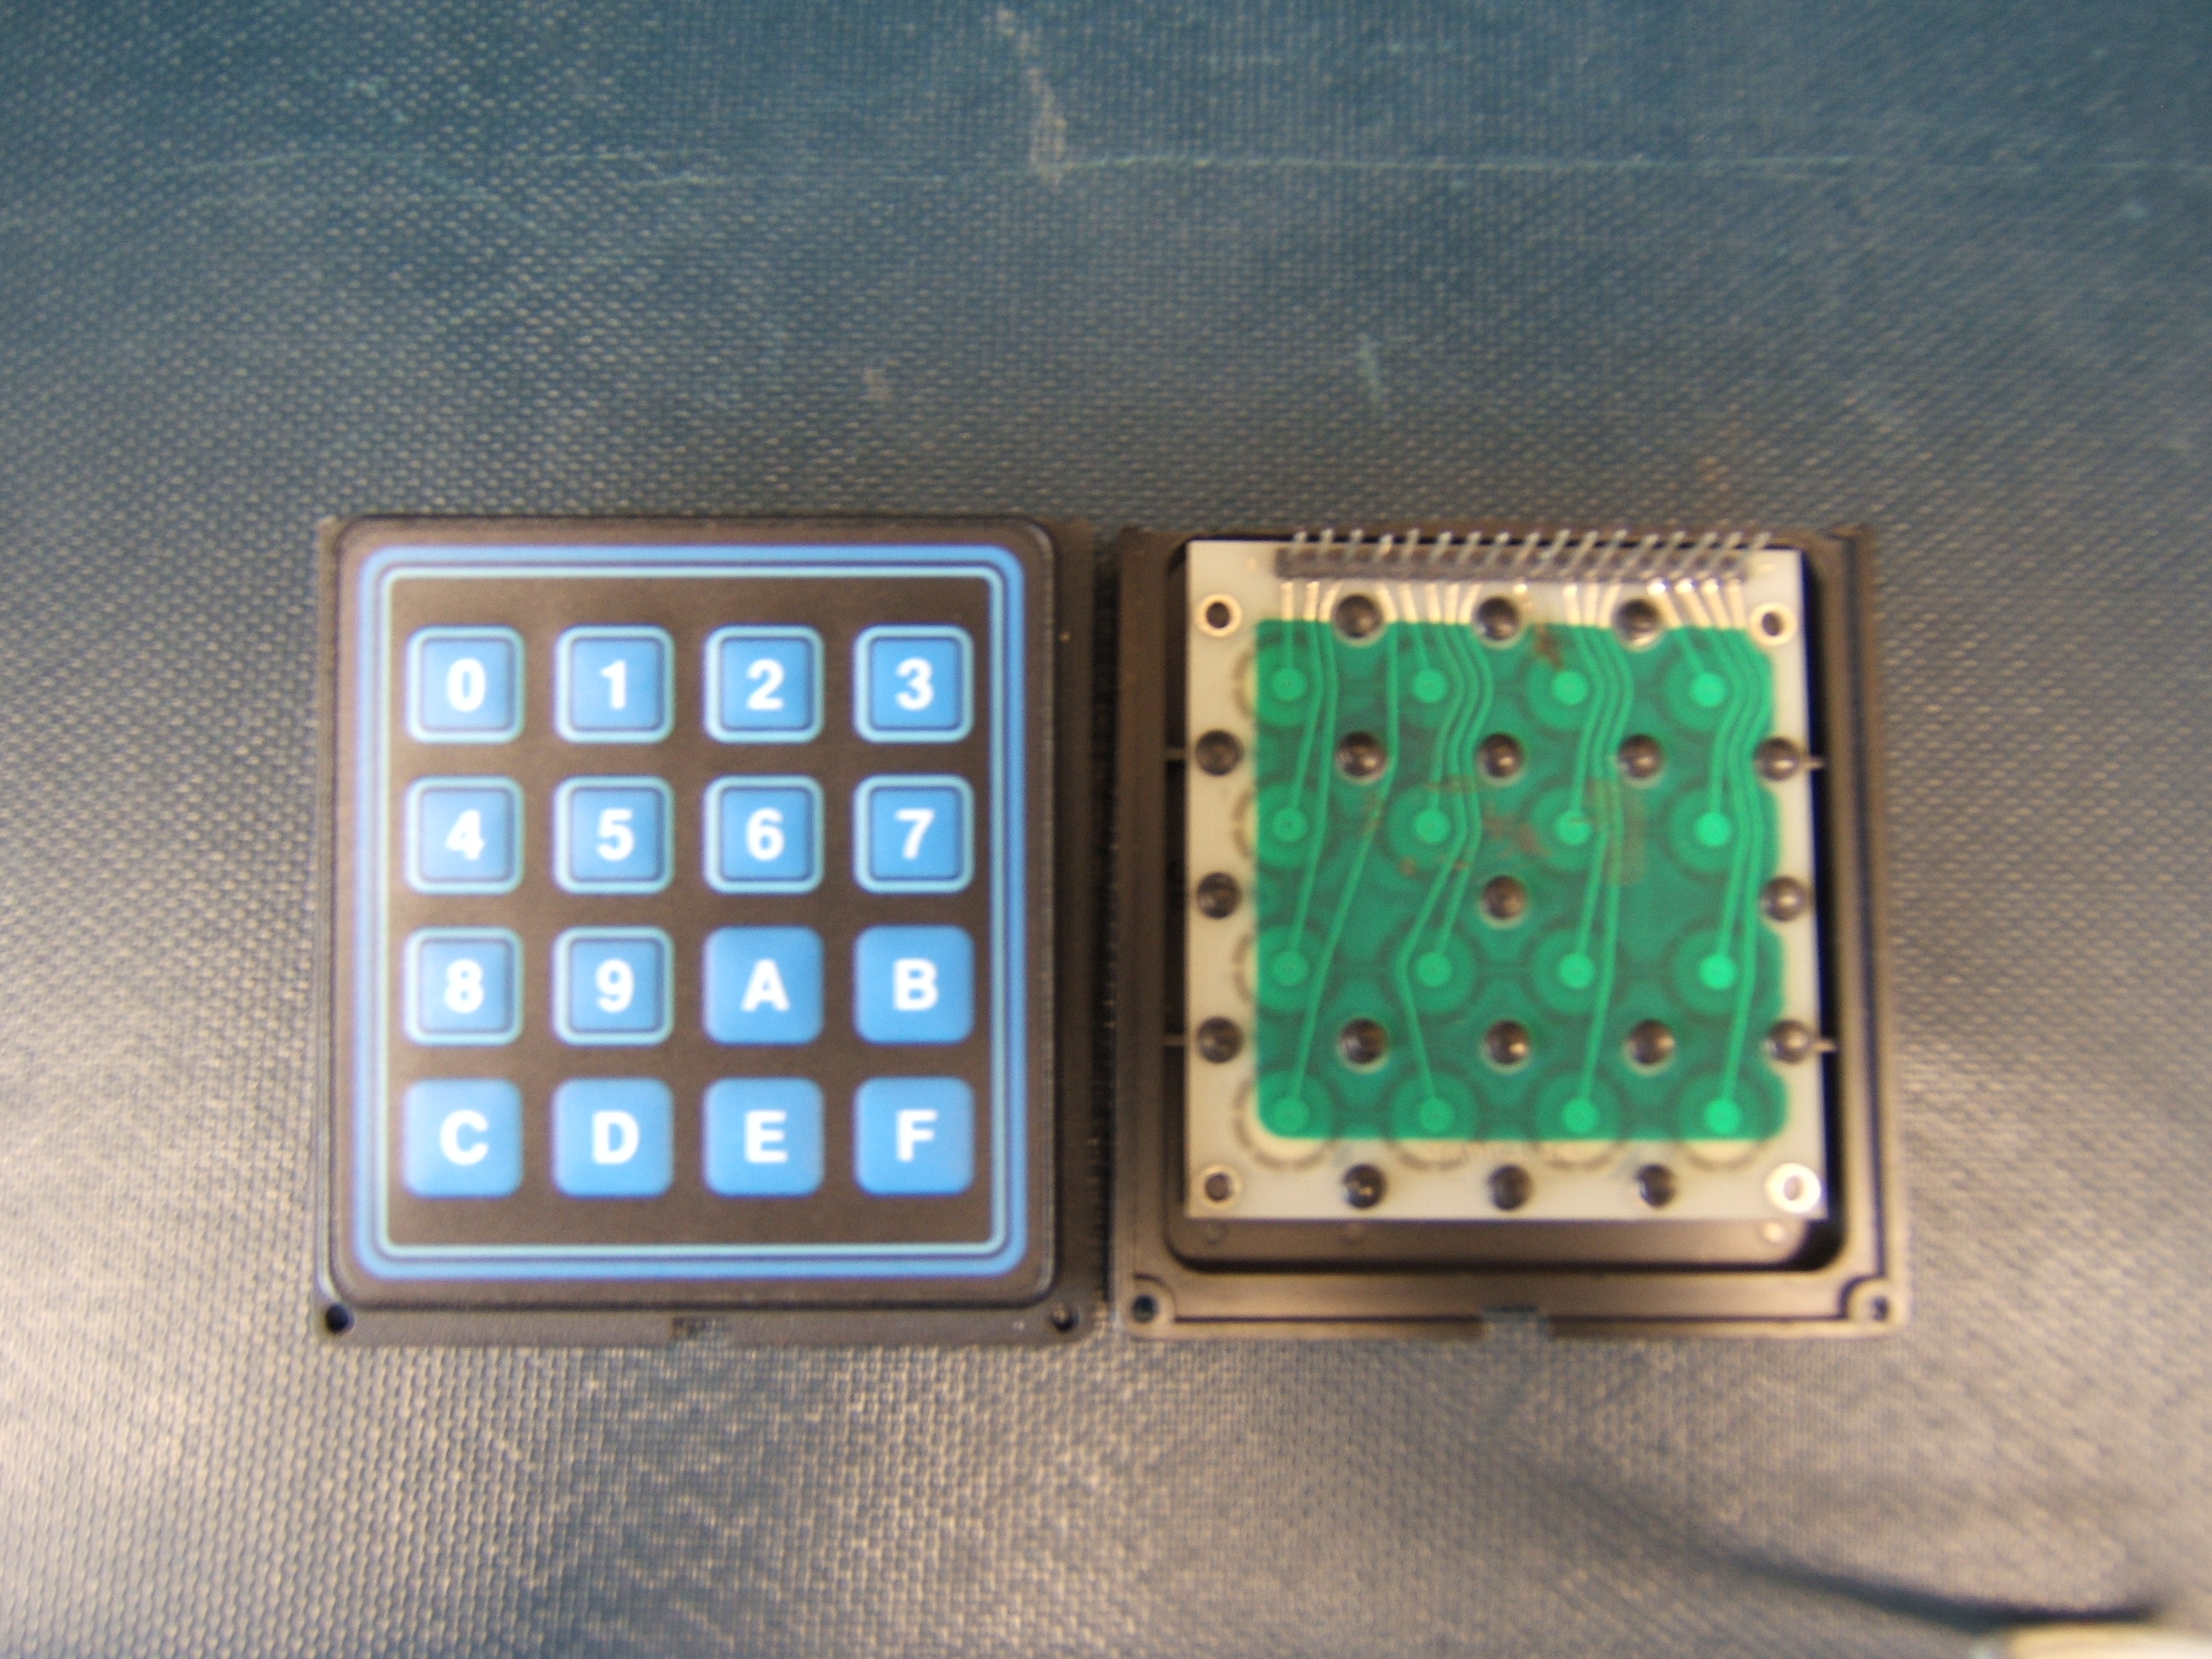 keypad top and bottom view